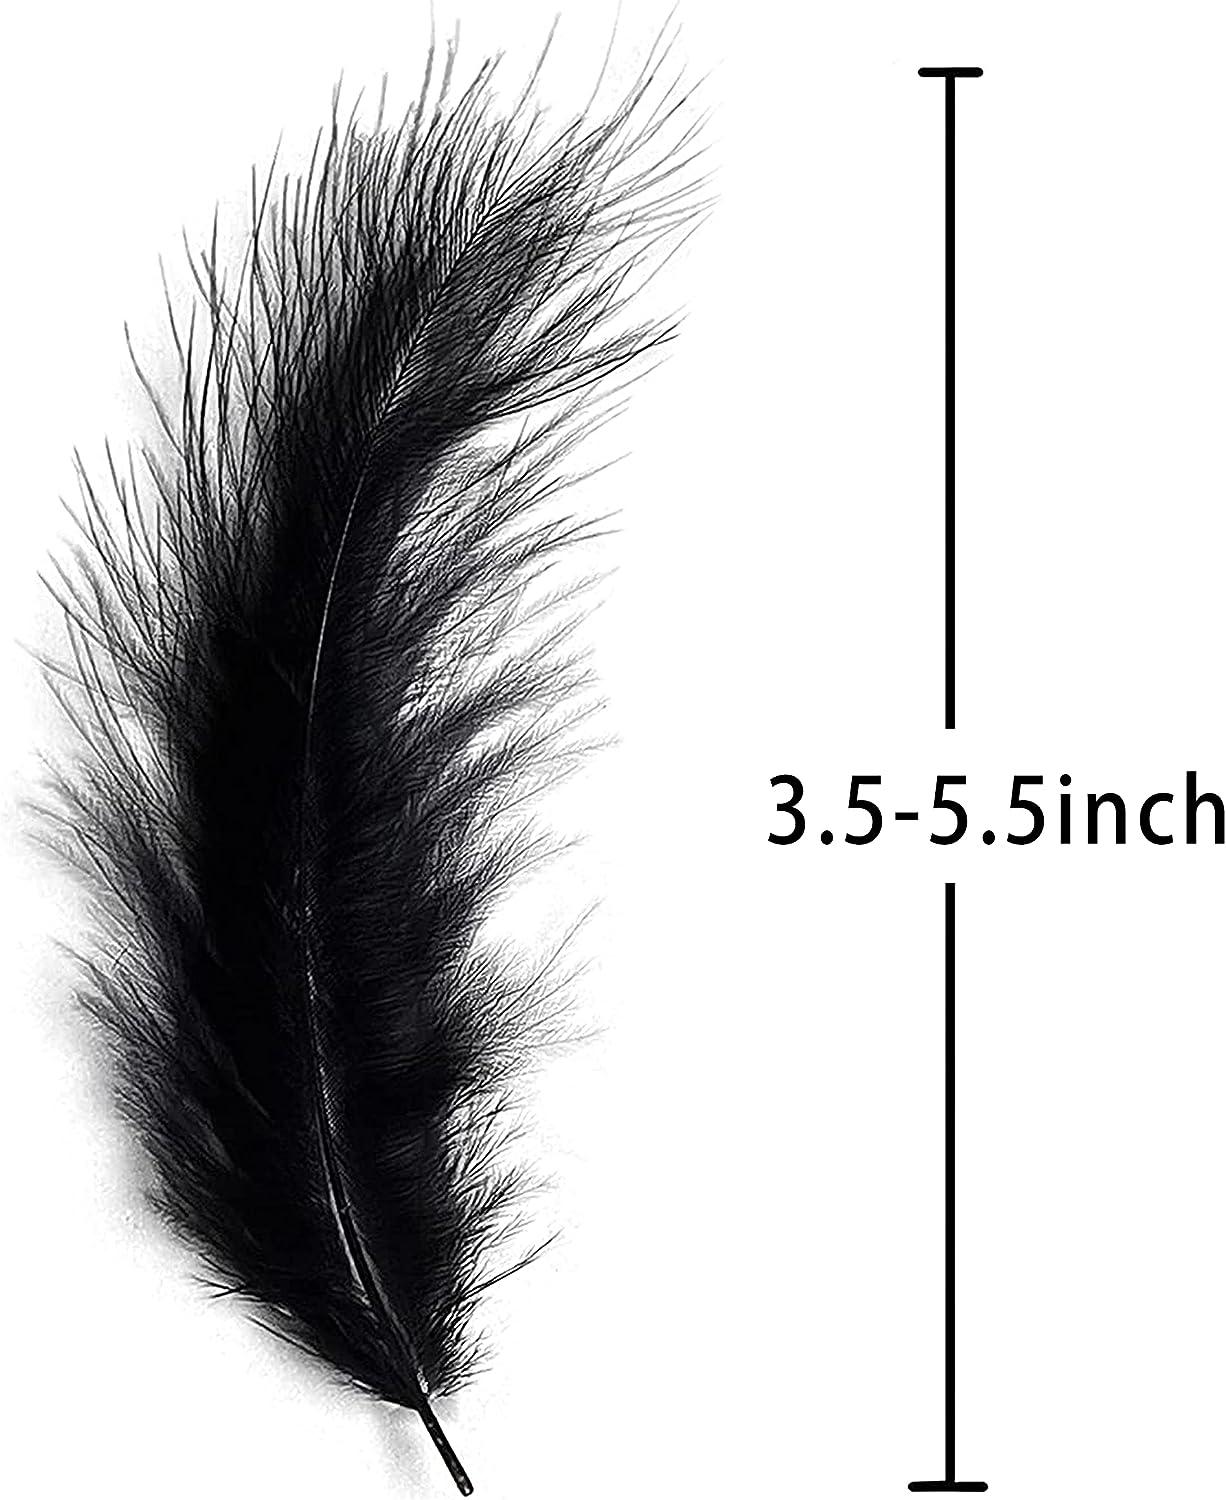 black feathers